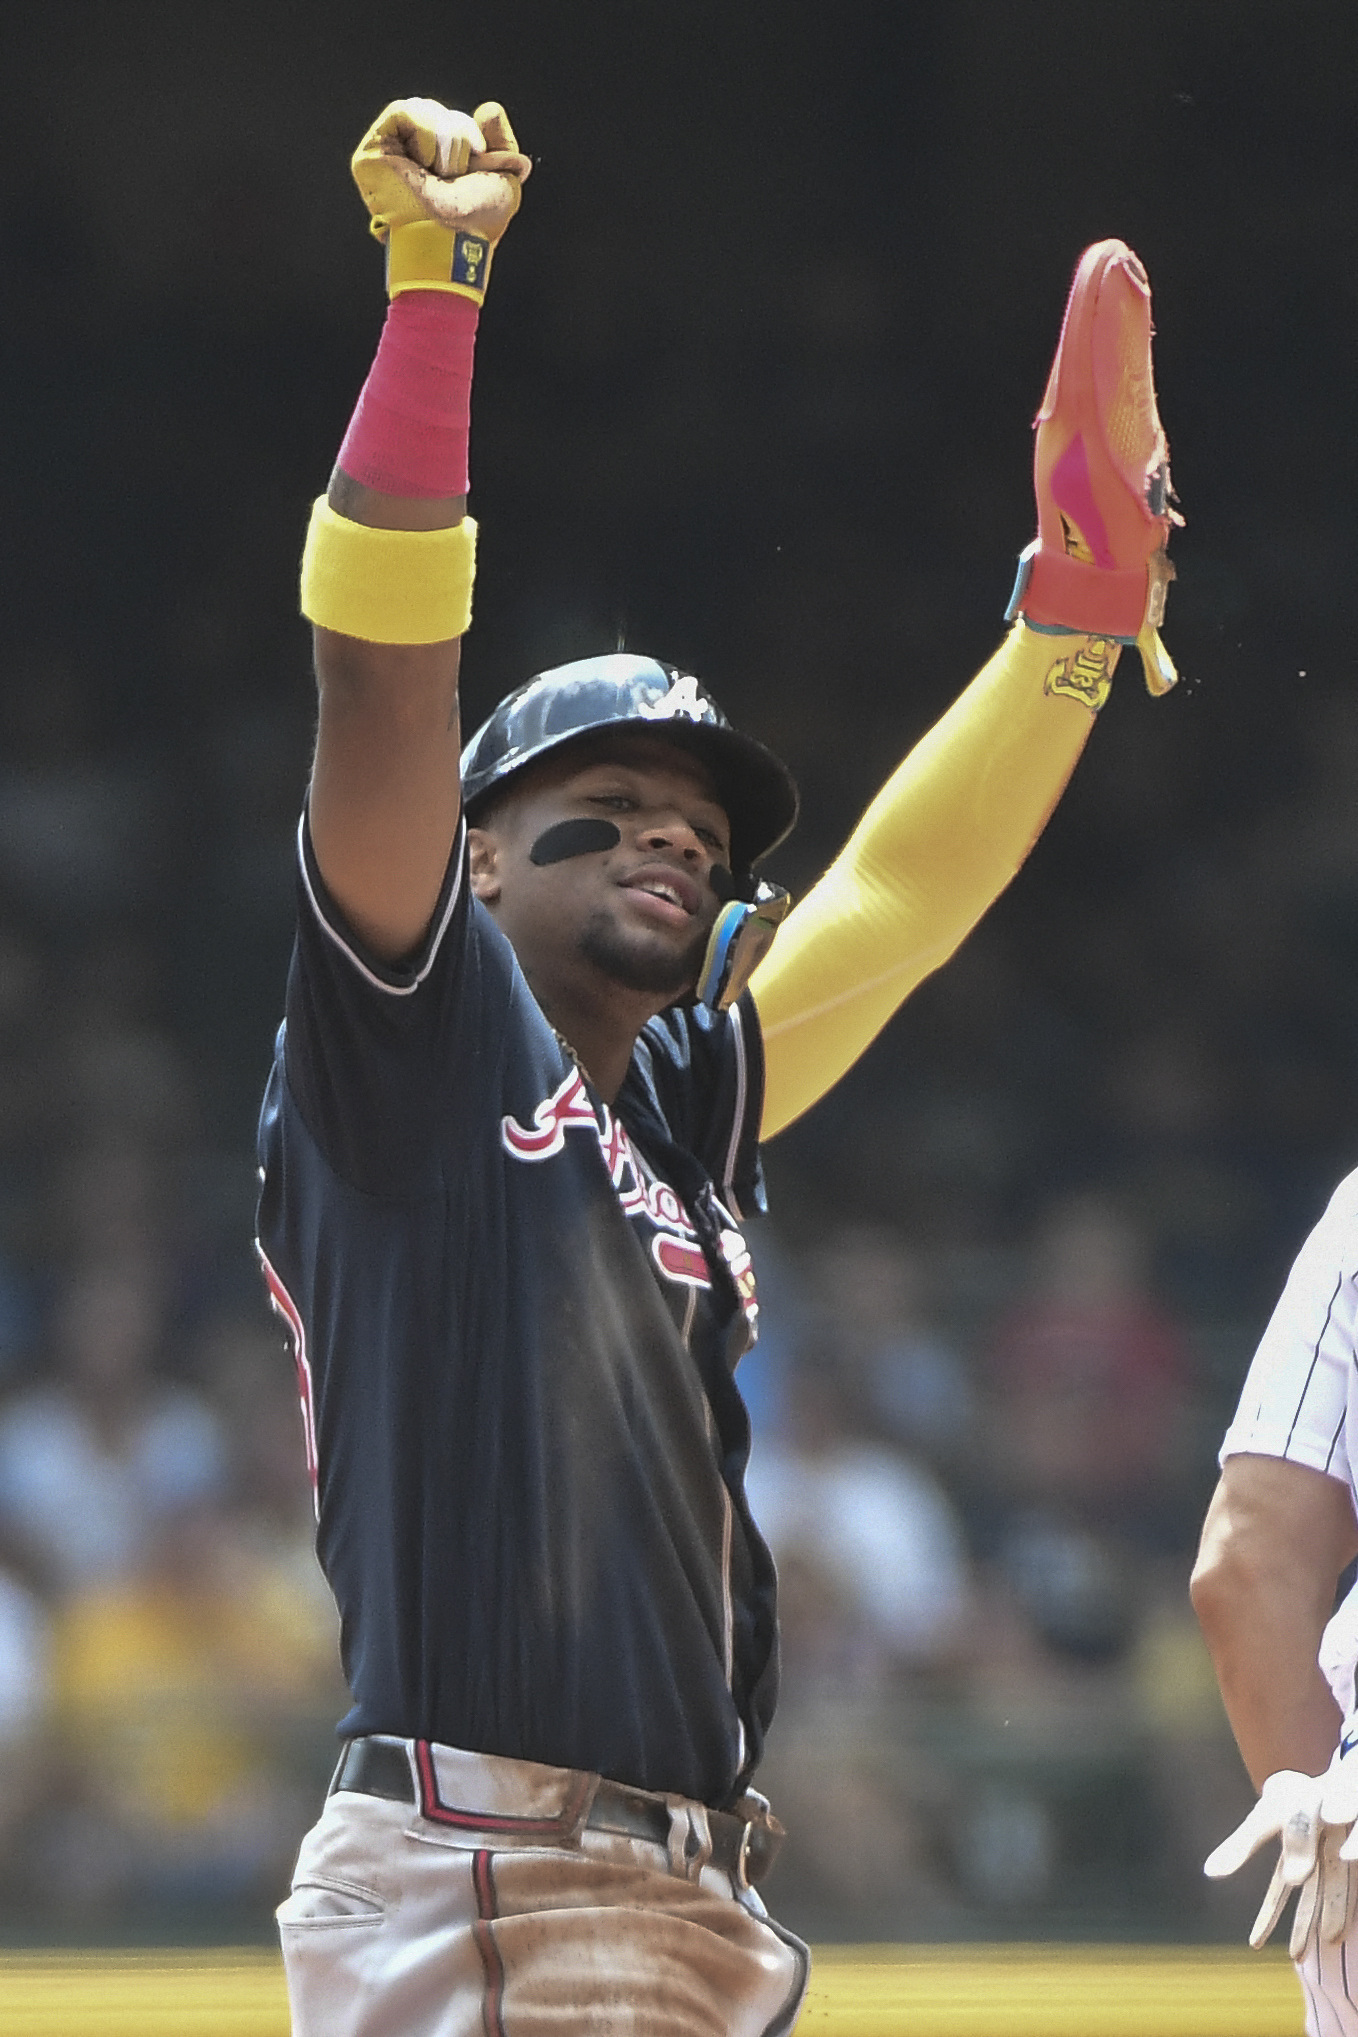 Tragedy and competition fuel Ozzie Albies' pursuit to the majors